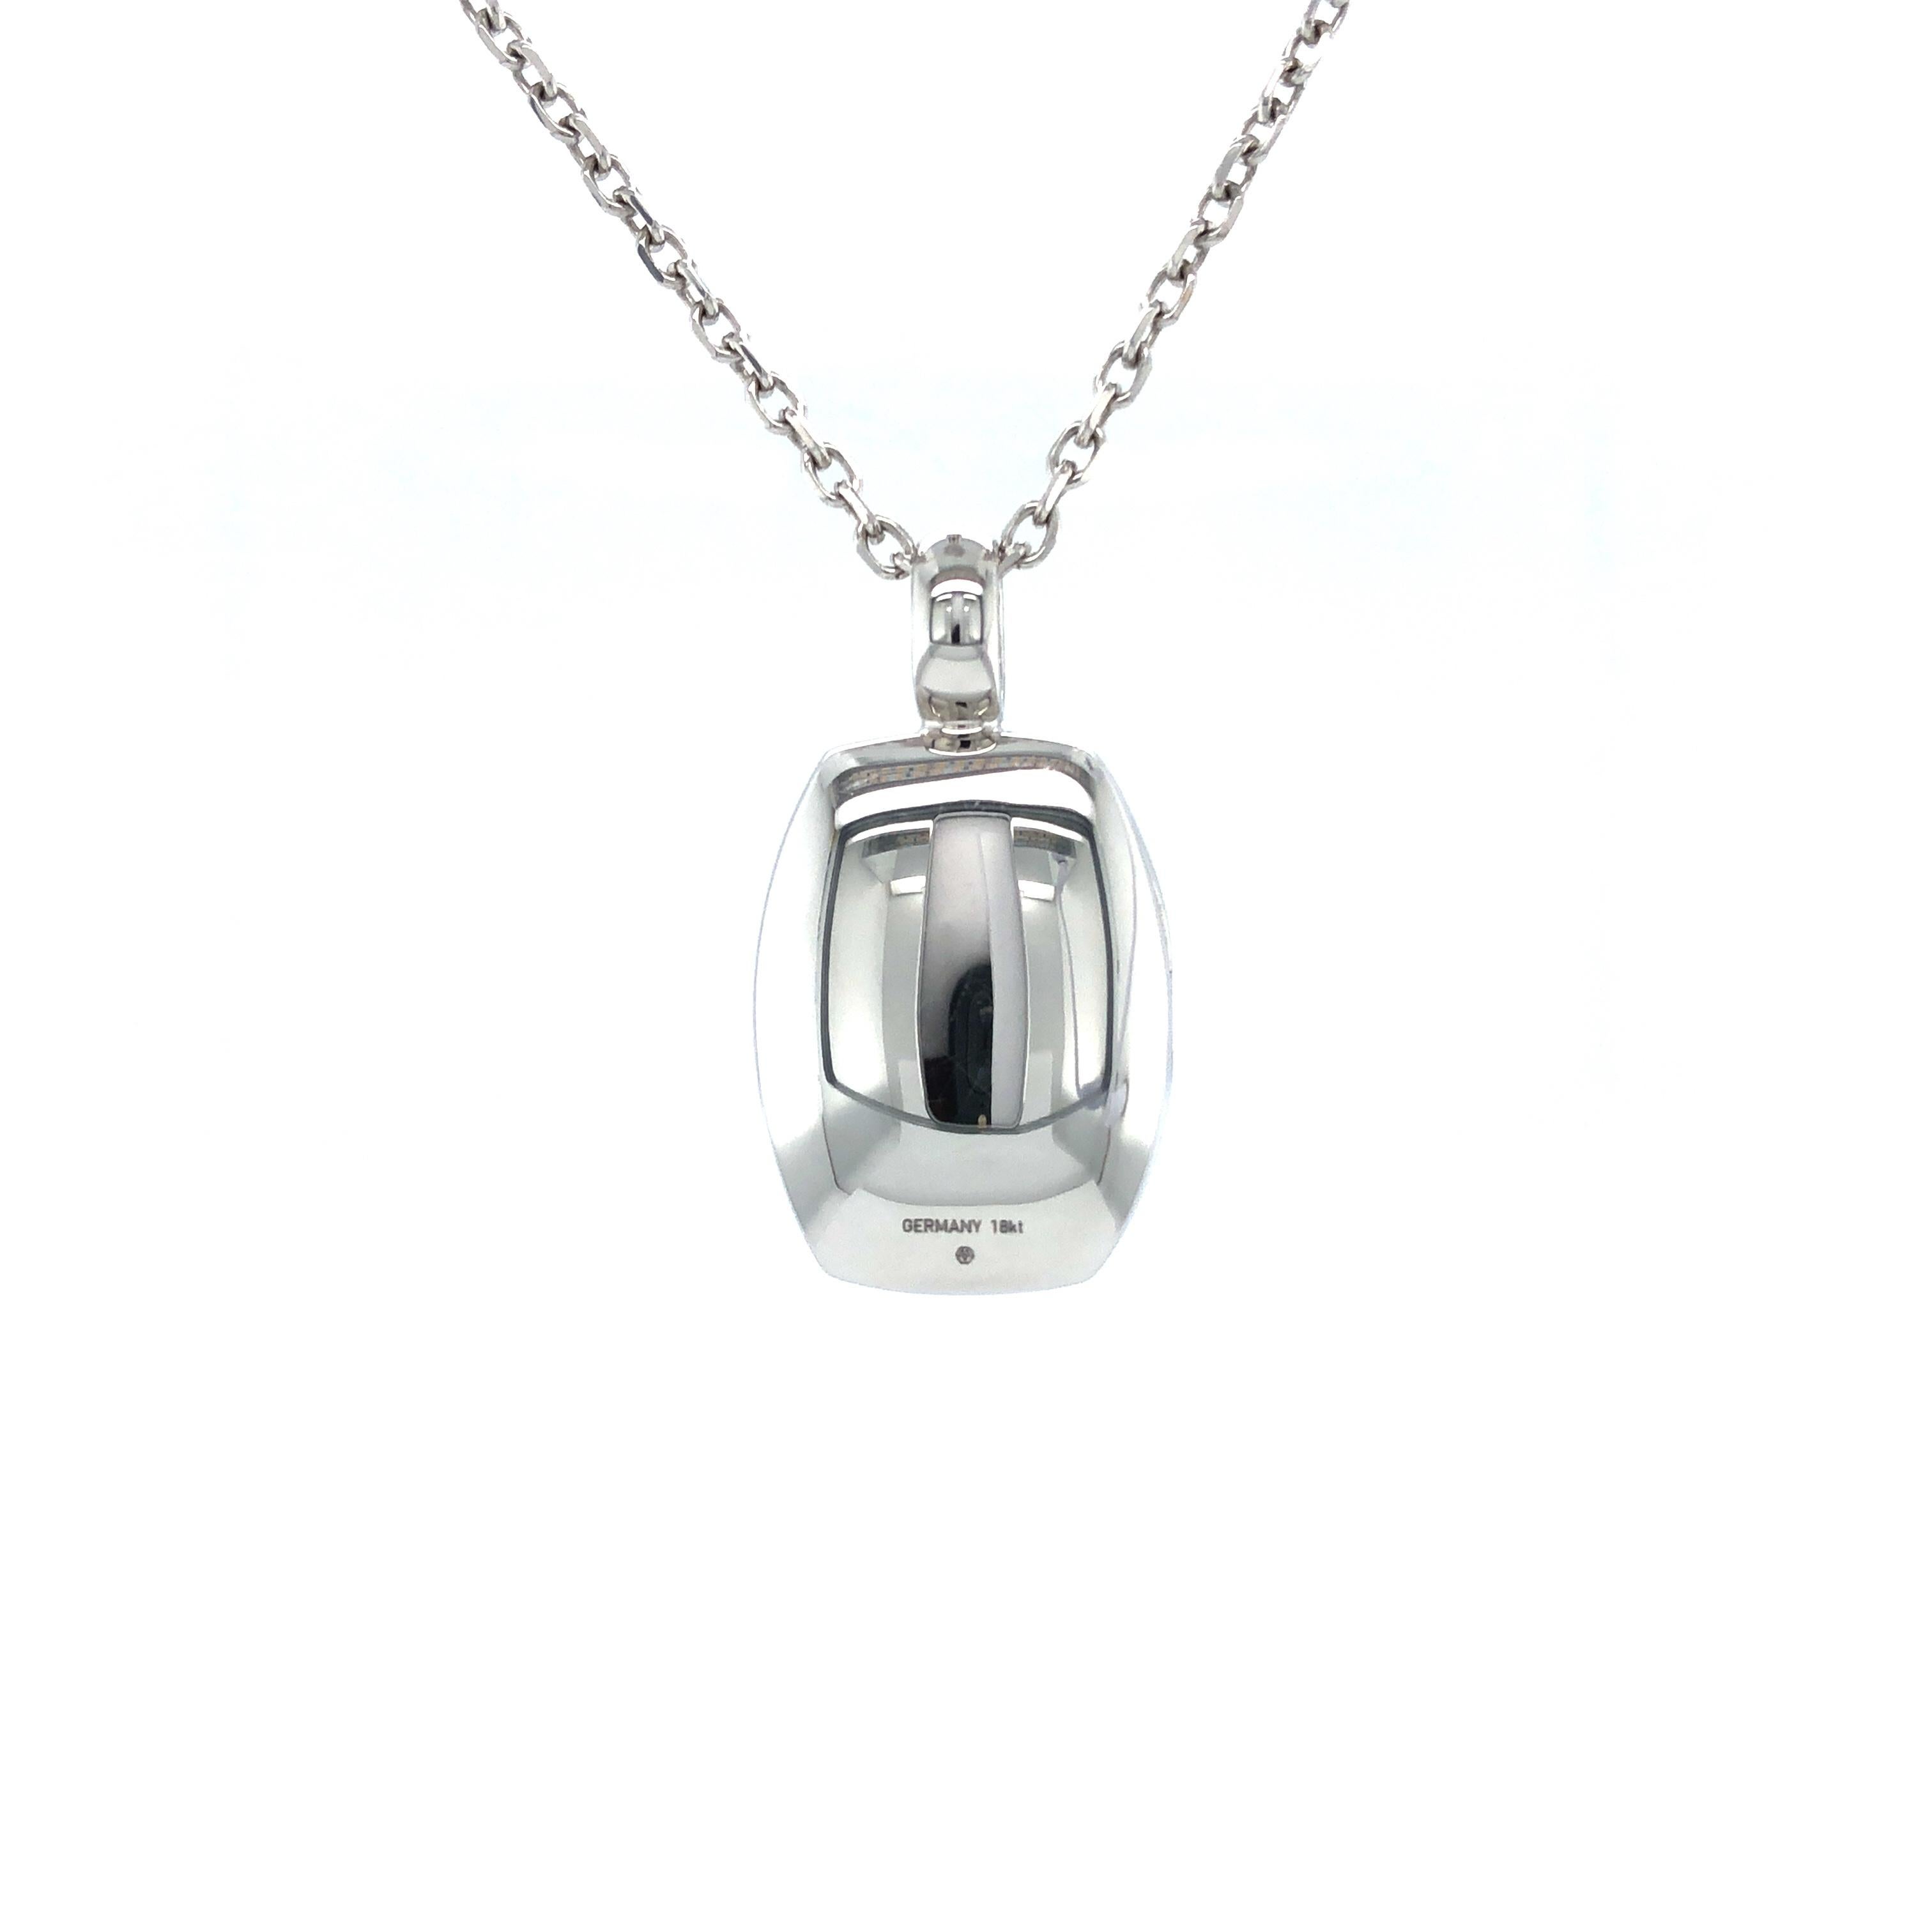 Contemporary Tonneau Shape 18k White Gold Locket Pendant with Rounded Corners - Two Pictures For Sale